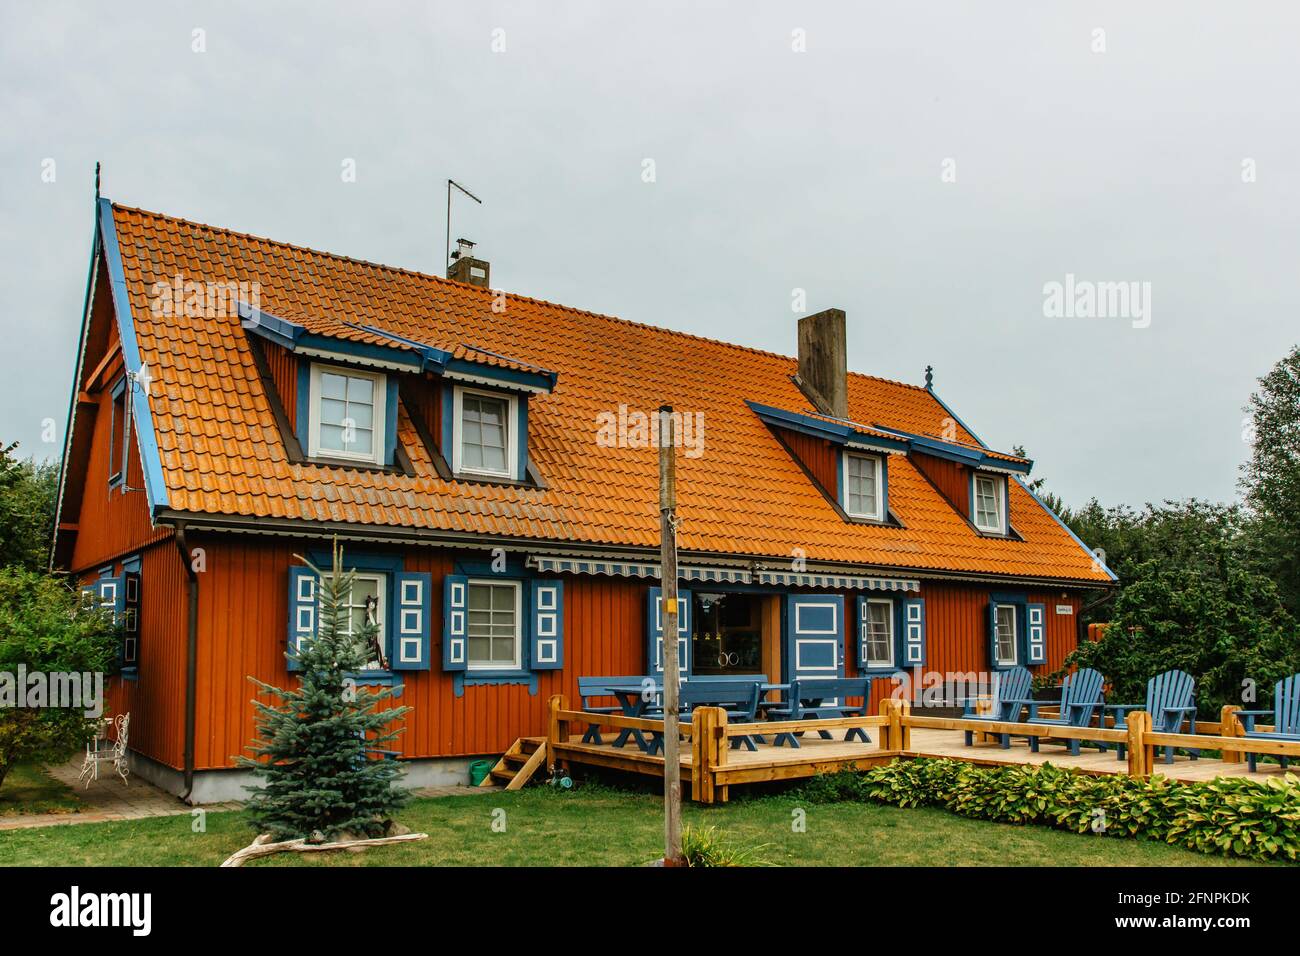 Nida,Lithuania- August 10,2019. Beautiful colorful traditional wooden architecture. Resort town on Curonian Spit. Typical fisherman's house Stock Photo